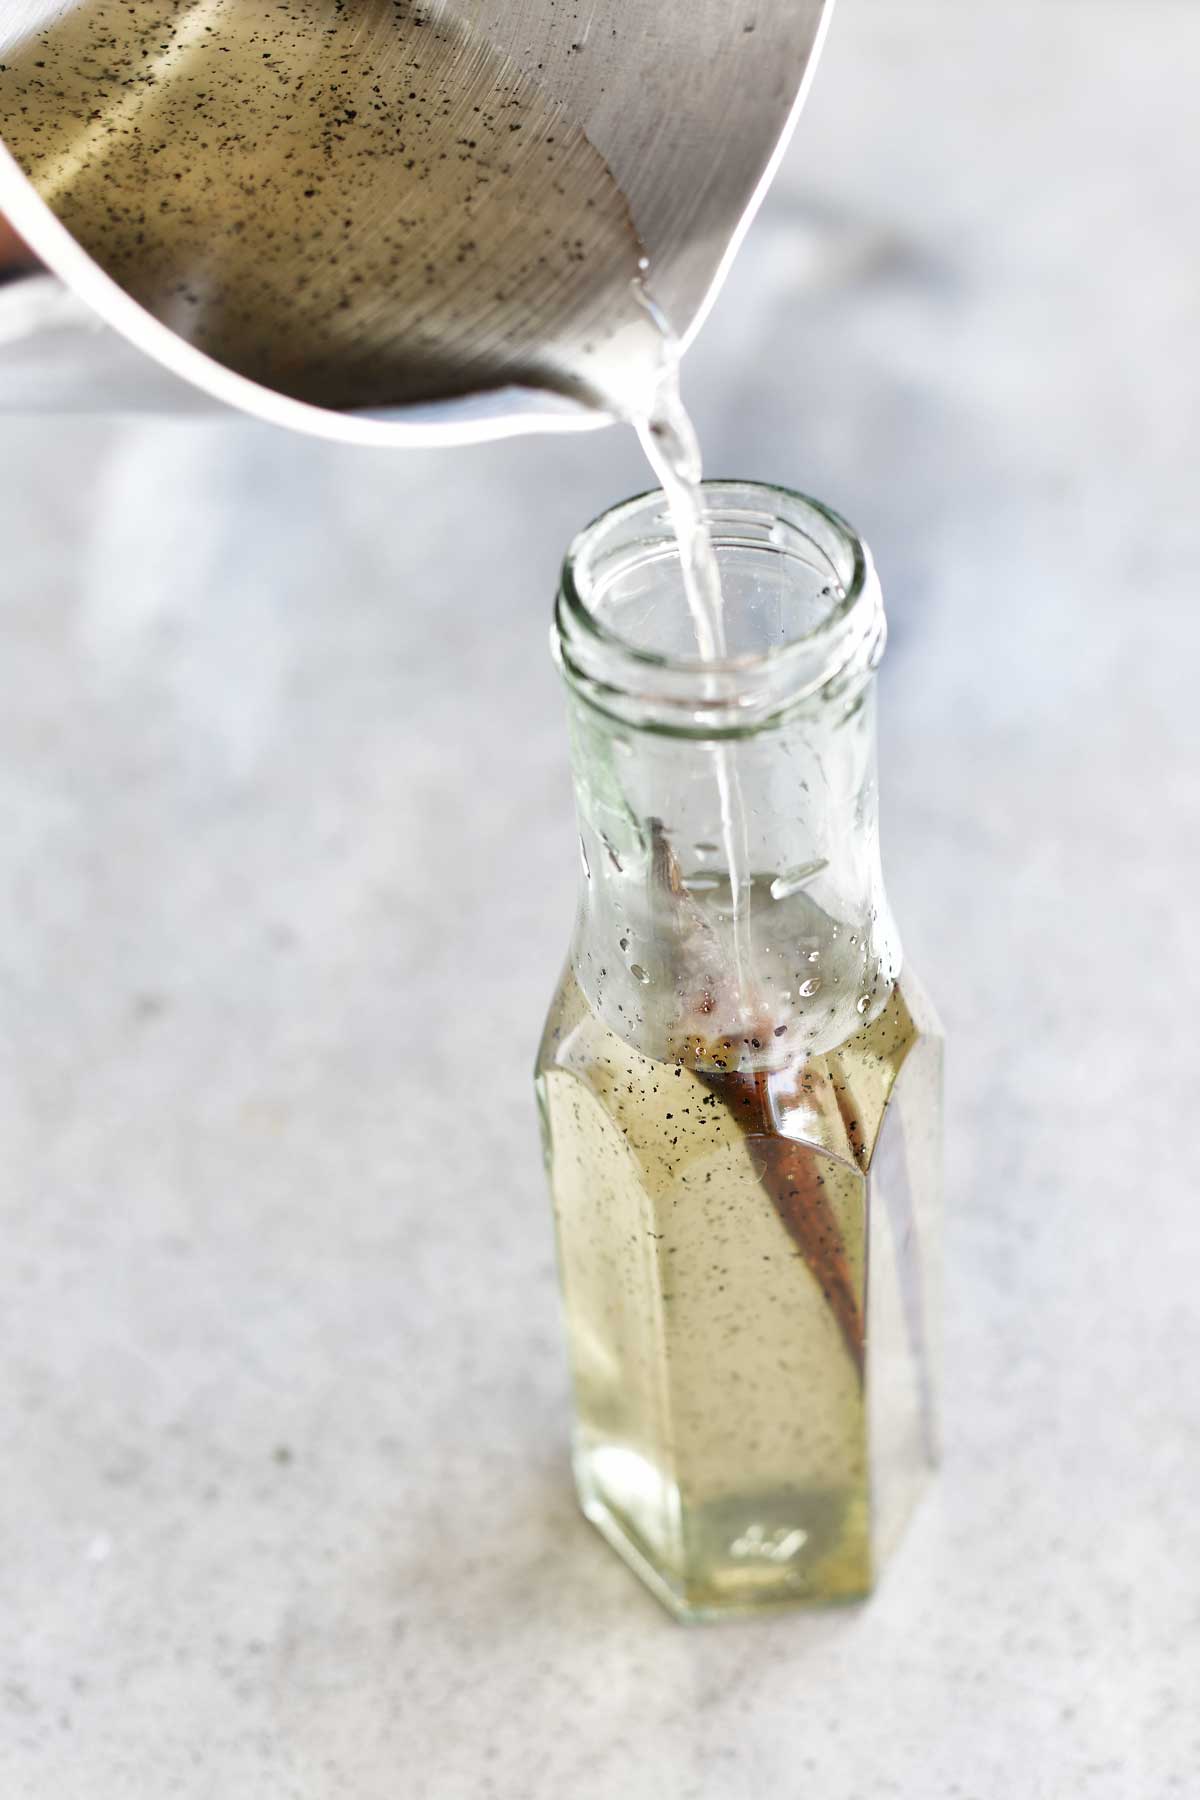 homemade vanilla be syrup being poured into a glass bottle